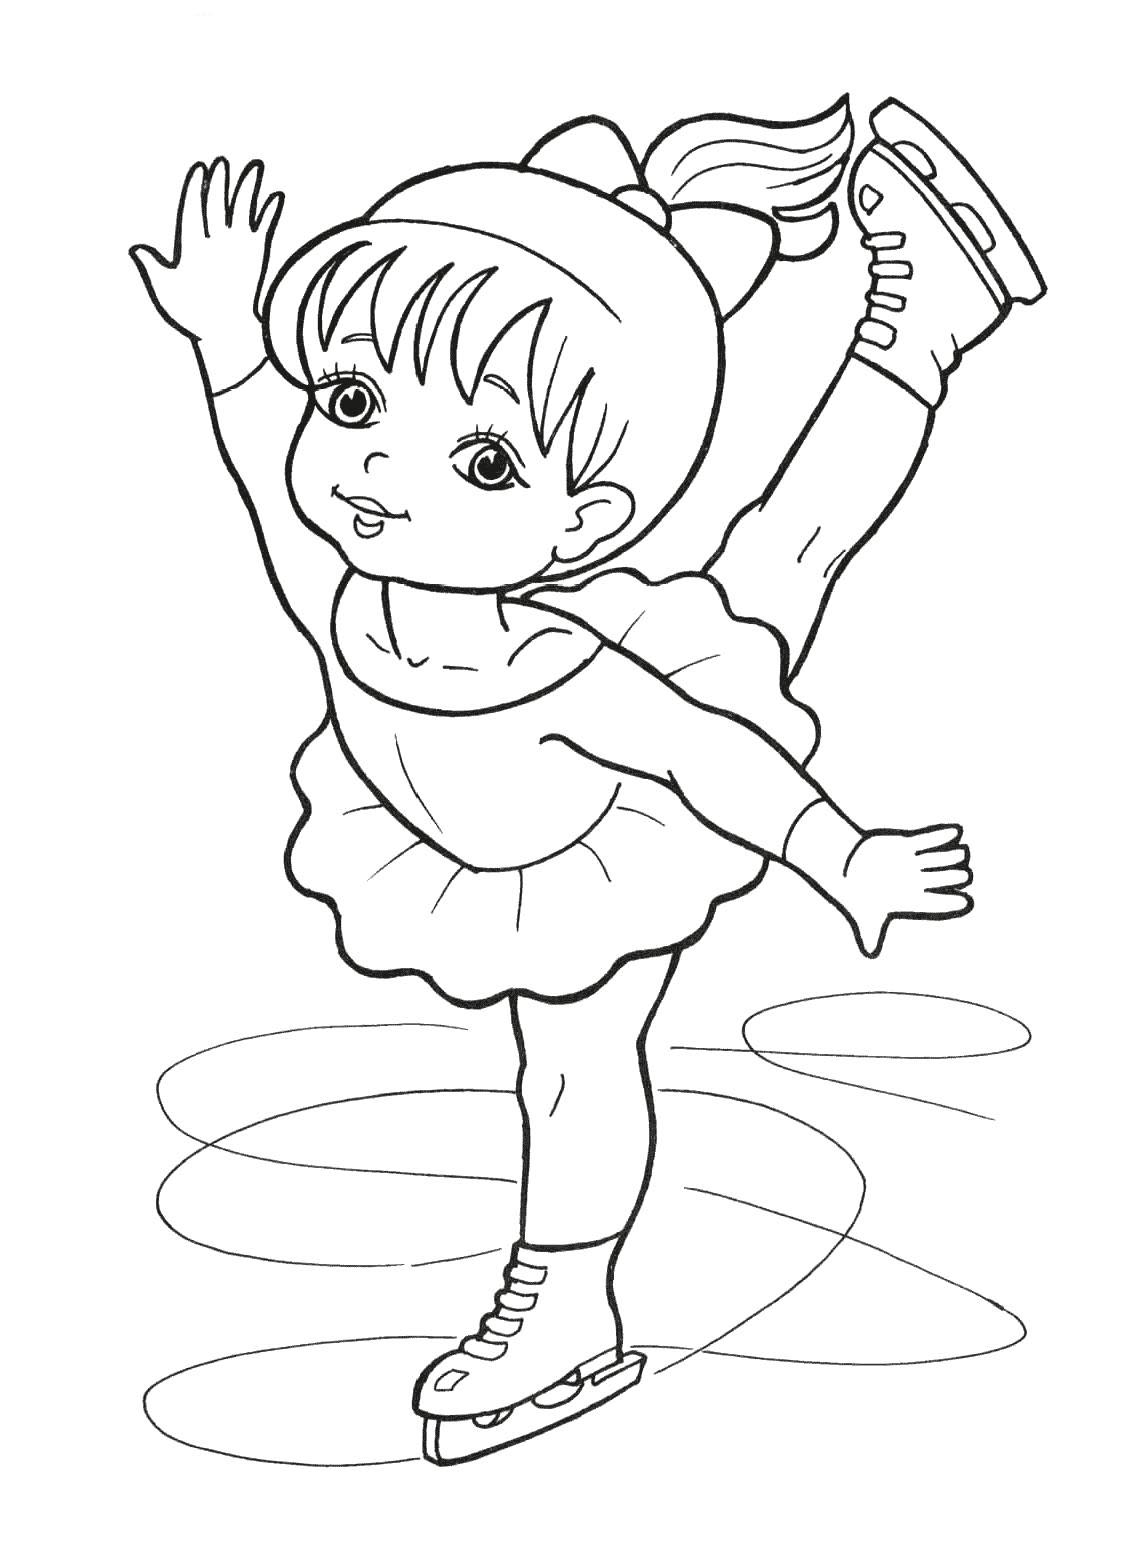 Figure skater coloring pages to download and print for free